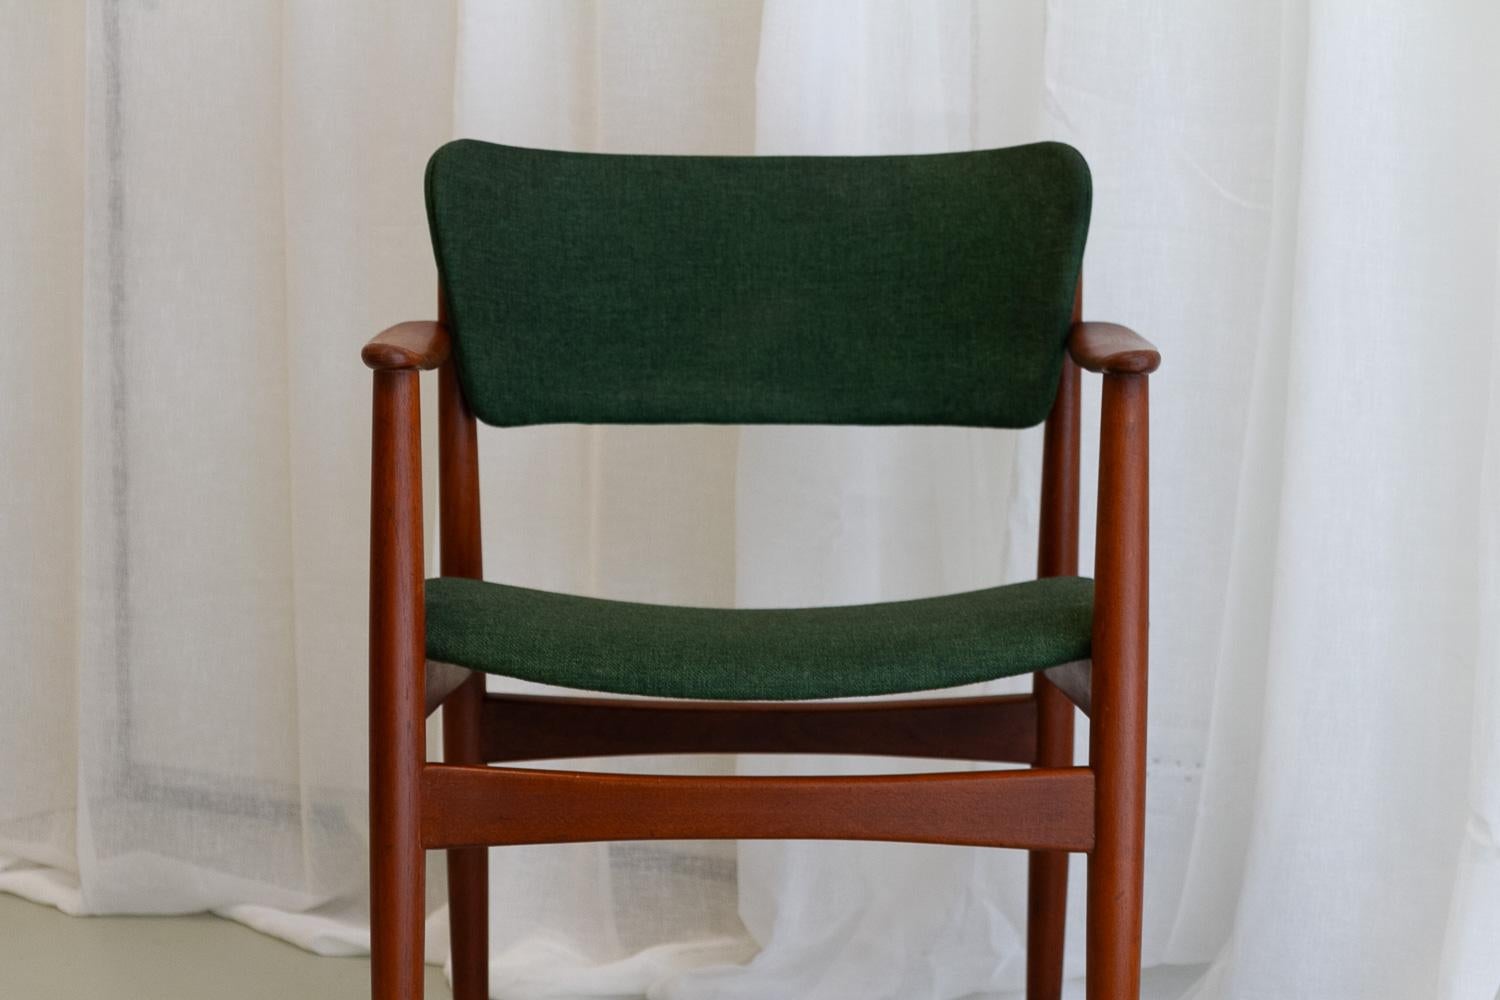 Mid-20th Century Danish Modern Teak Armchair with Green Wool, 1960s. For Sale